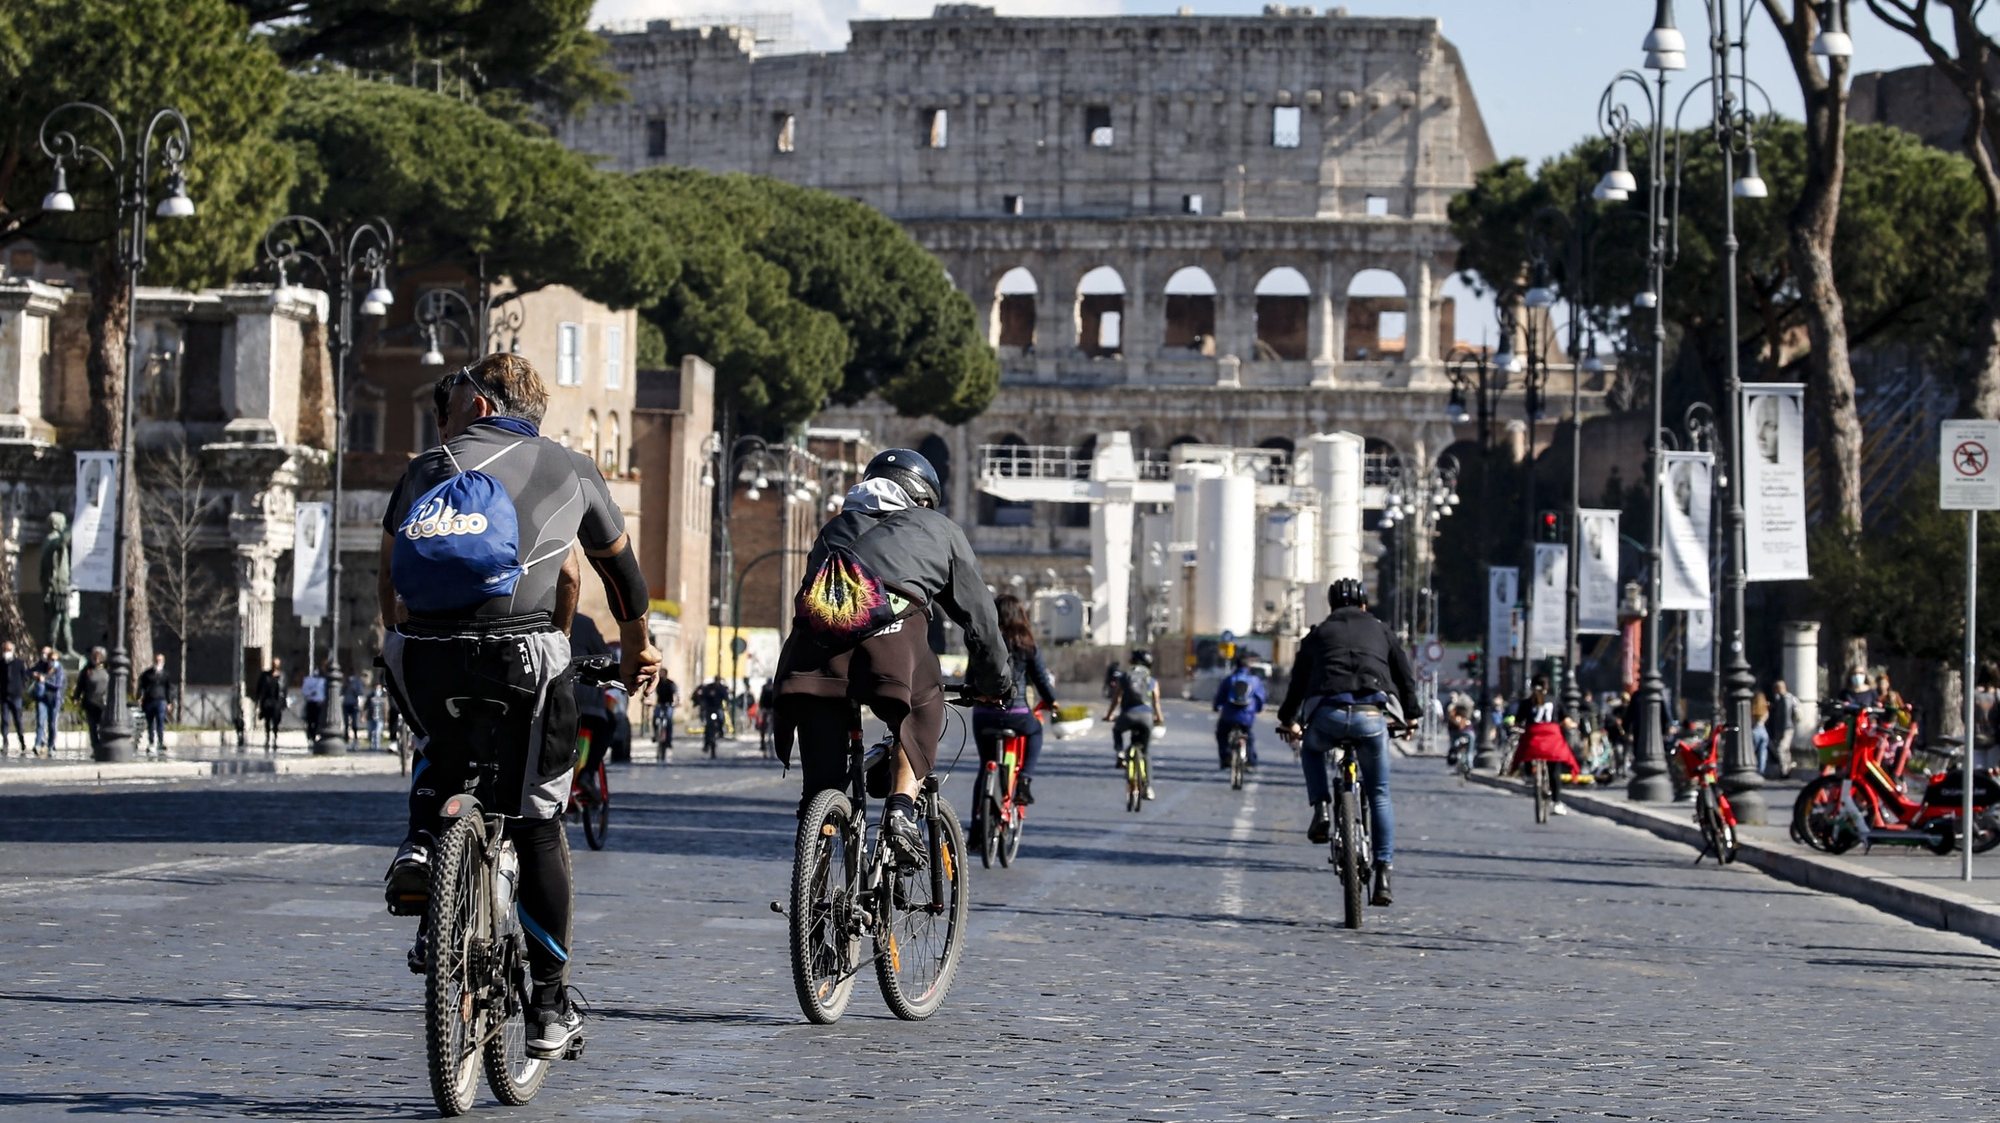 epa09103380 People riding on their bicycles in downtown during the third wave of the Covid-19 Coronavirus pandemic in  Rome, Italy, 28 March 2021.  EPA/FABIO FRUSTACI